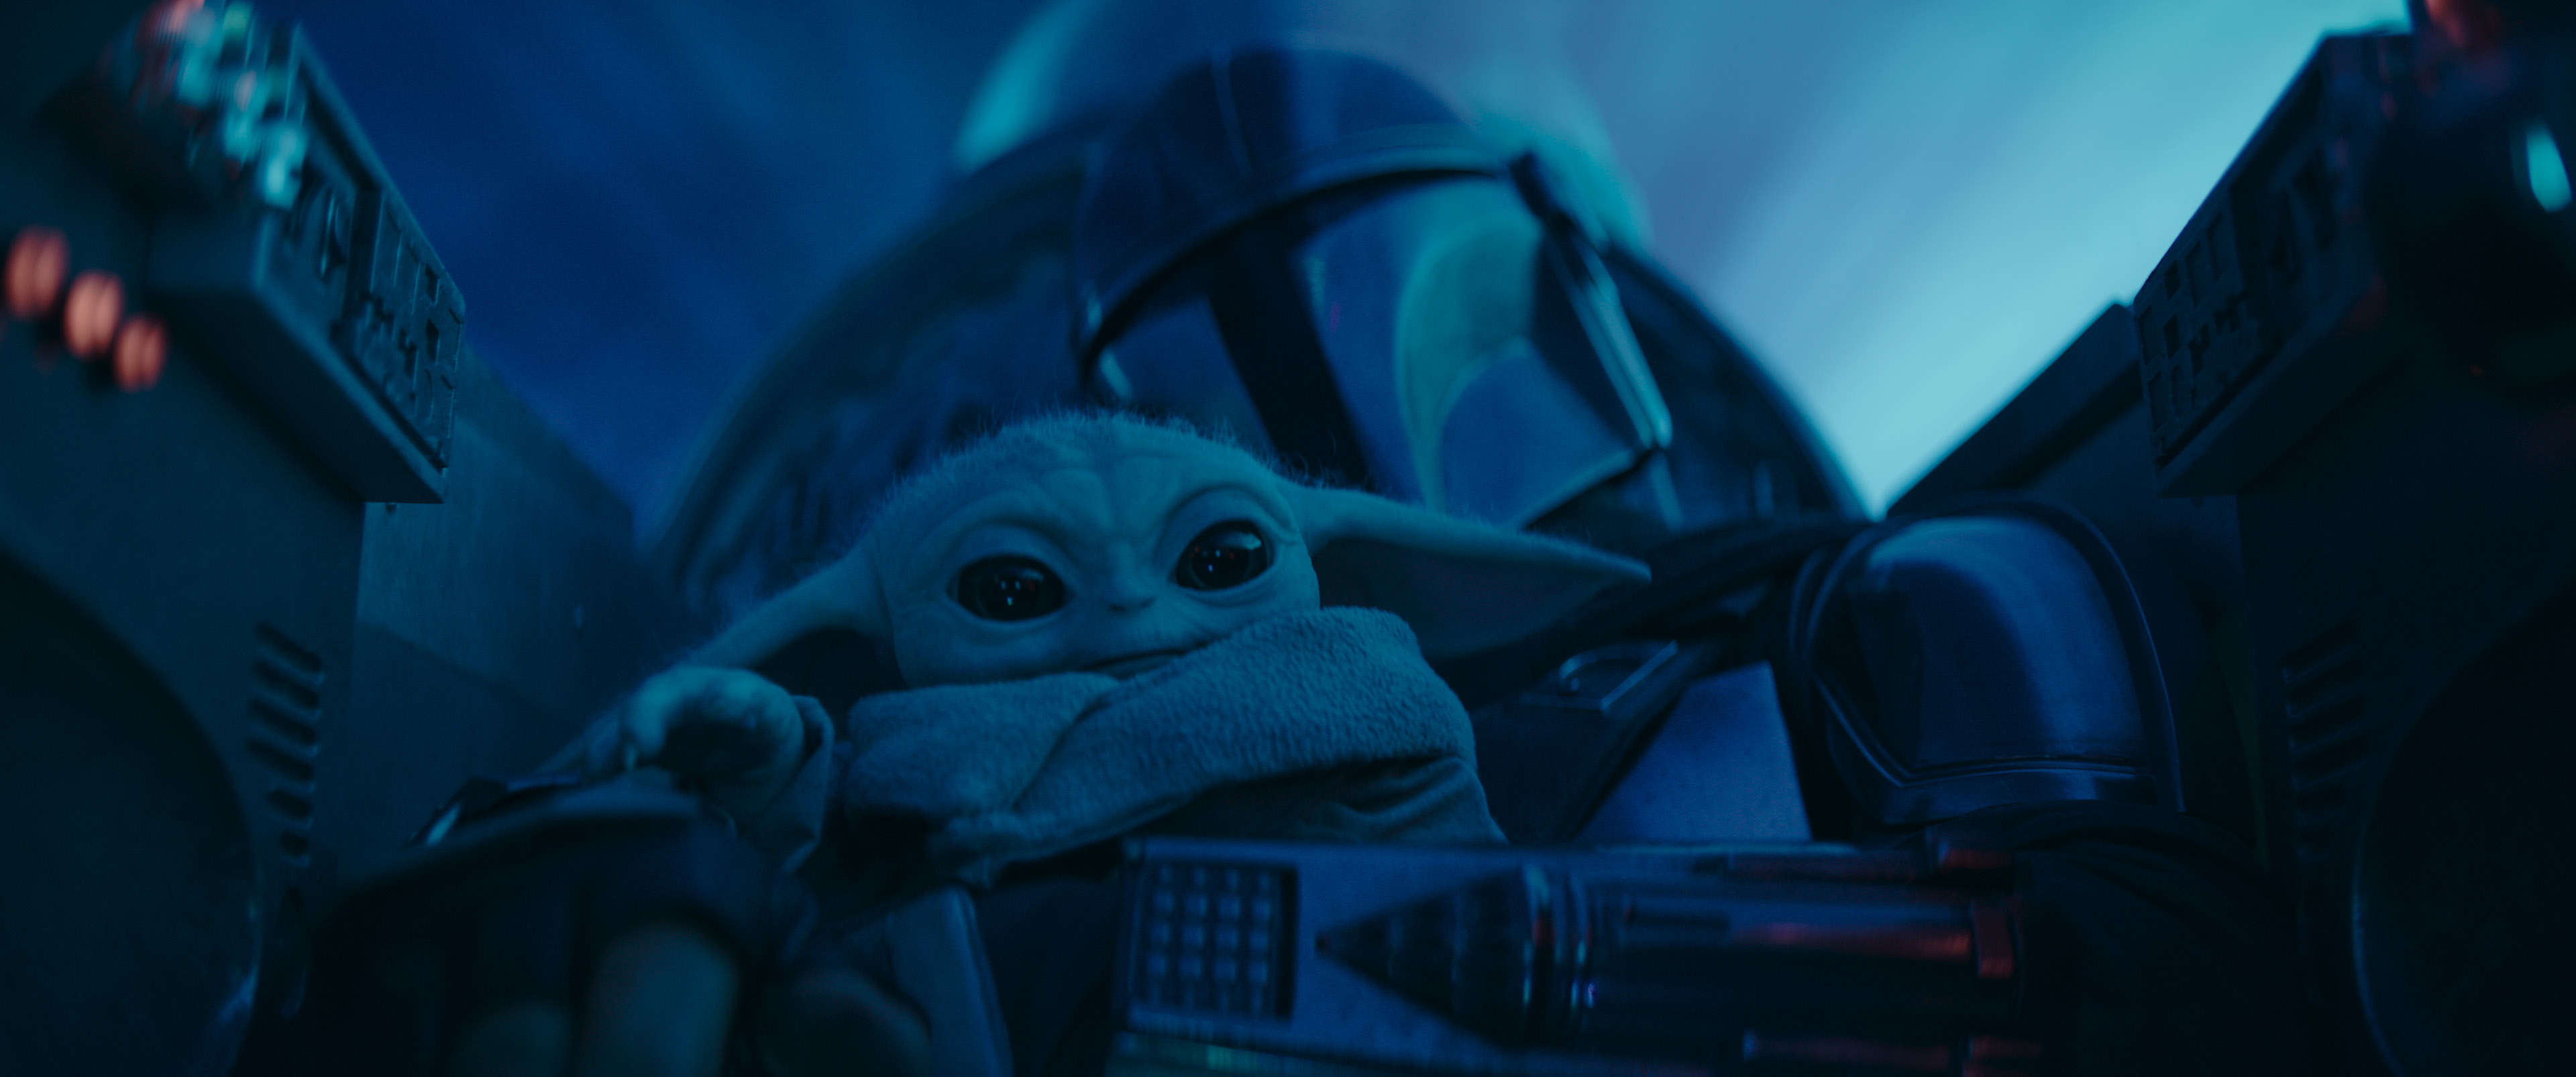 `Star Wars: The Mandalorian`: A scene from season 3 of `The Mandalorian,` streaming exclusively on Disney+. (key art and images © and courtesy of Disney Media & Entertainment Distribution)